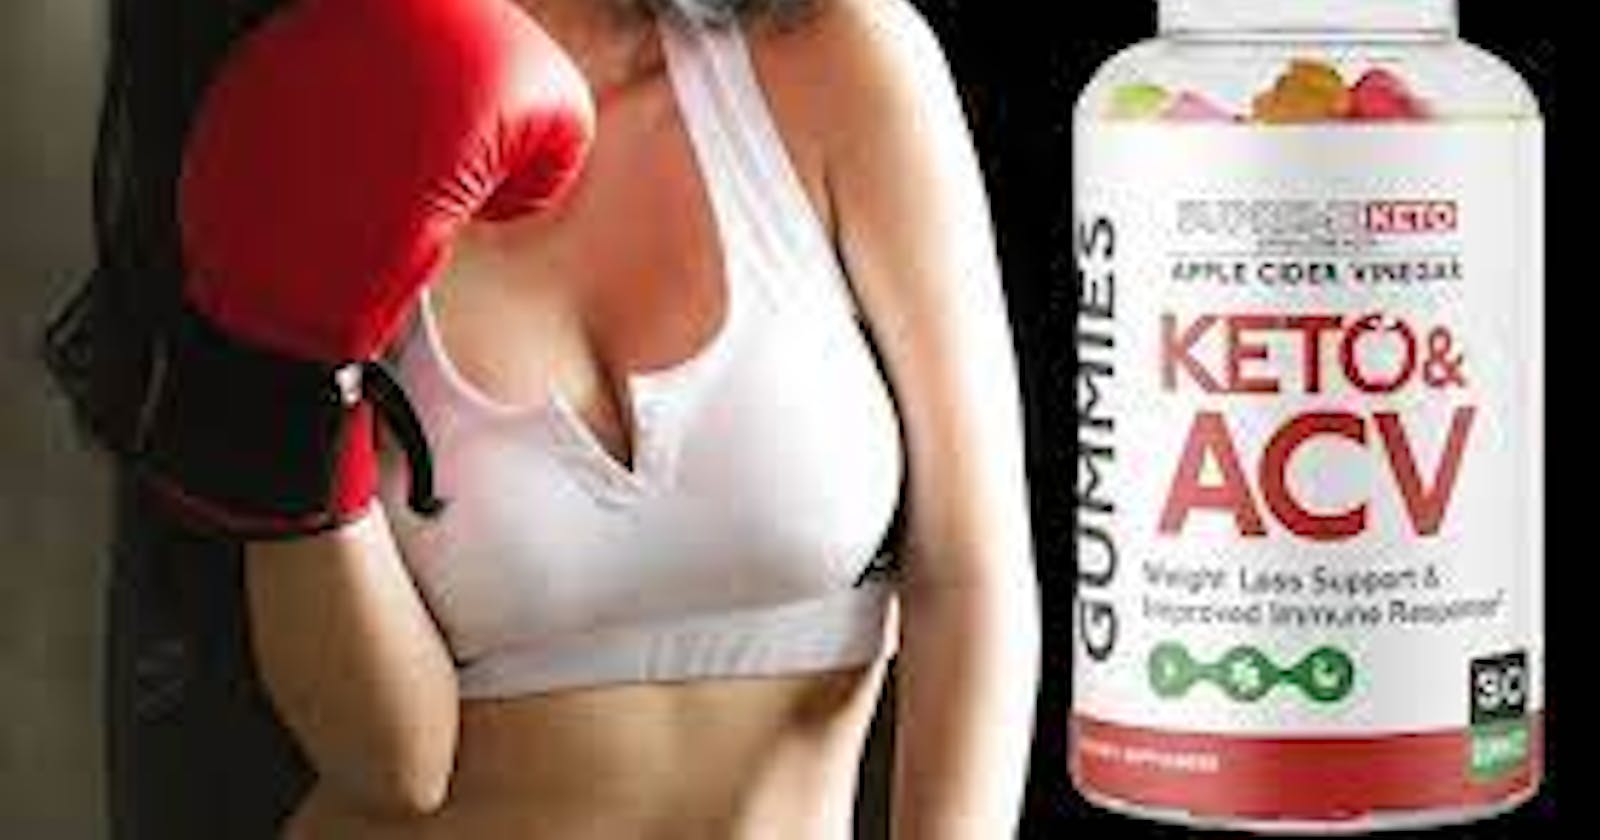 Anatomy One Keto ACV Gummies Pills: Everything Consumers Need to Know About Pills Includes Apple Cider Vinegar goBHB Exogenous Ketones Advanced?